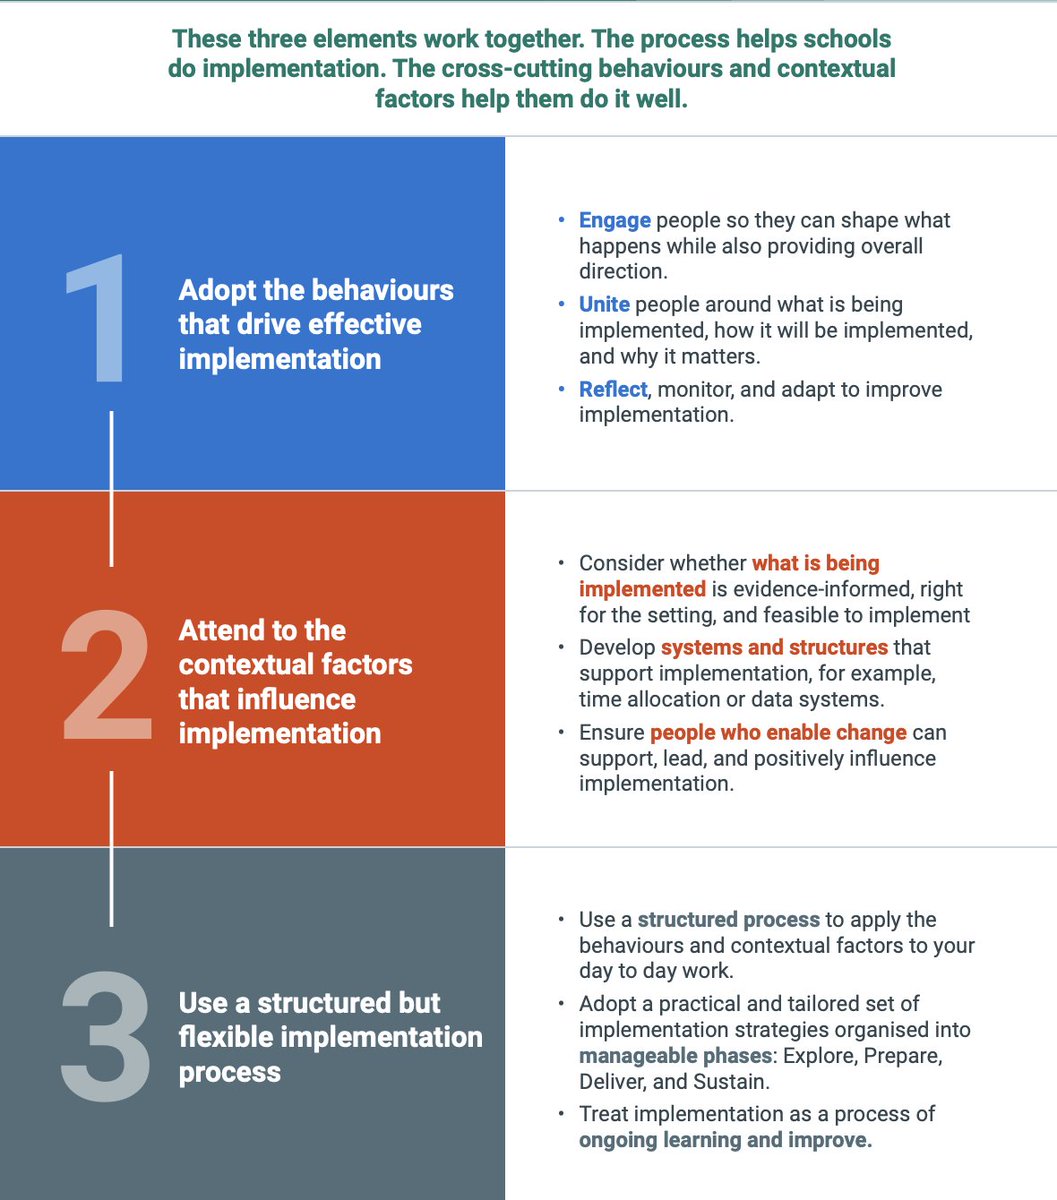 The @EducEndowFoundn have recently released an excellent guidance report about focusing on driving real improvements in schools through effective implementation. The guide sets out three key elements that enable effective implementation in schools: 1. Adopt the BEHAVIOURS that